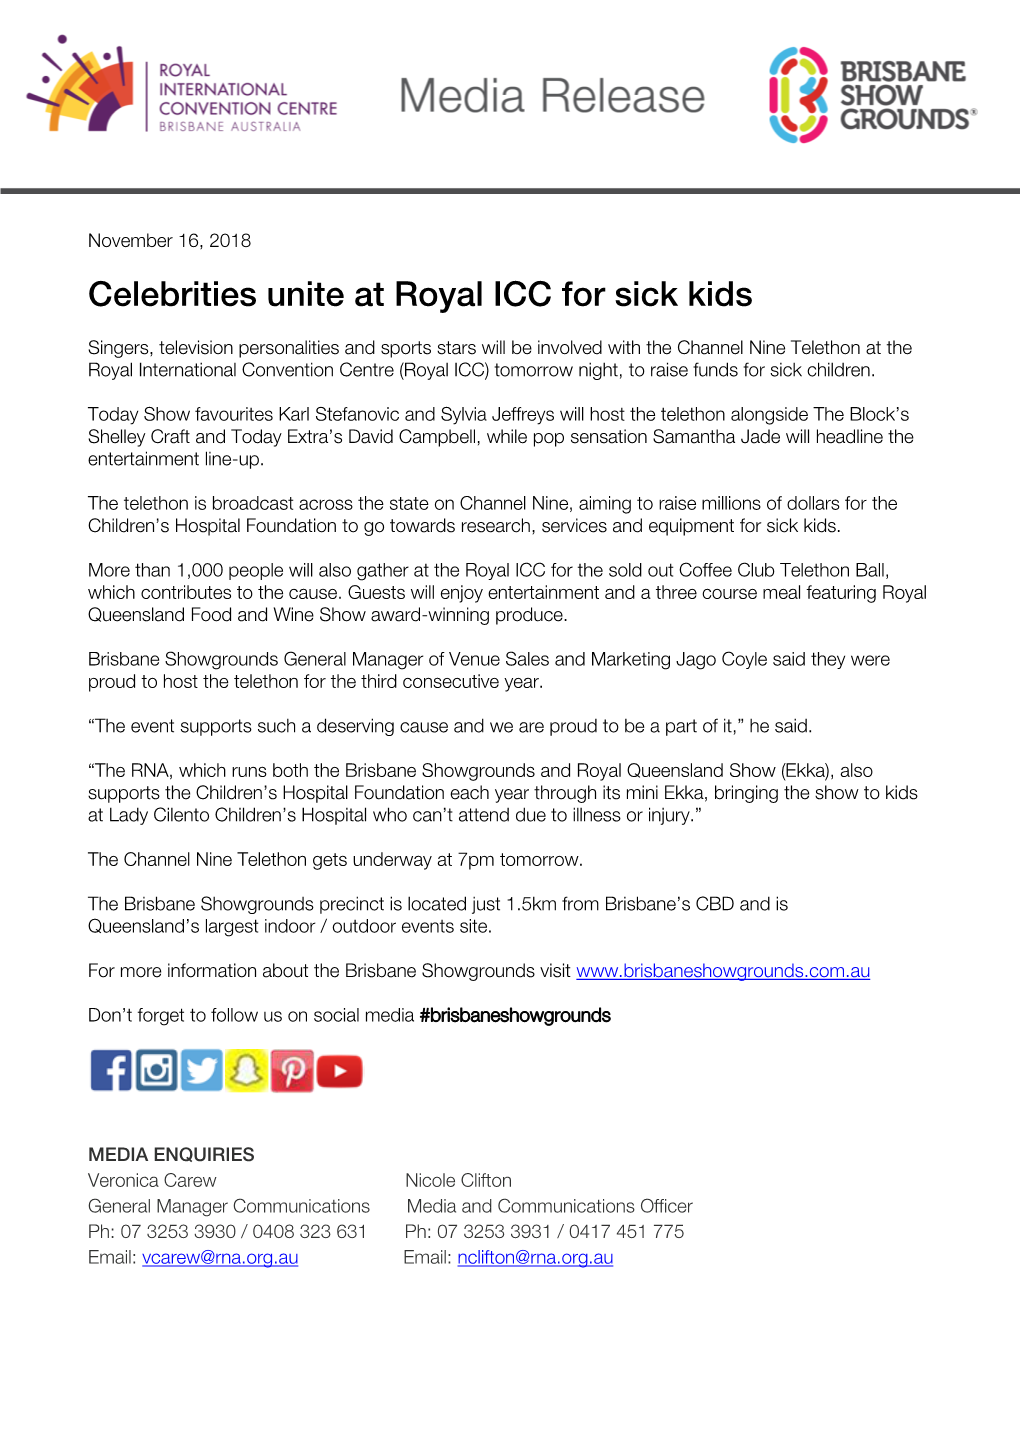 Celebrities Unite at Royal ICC for Sick Kids